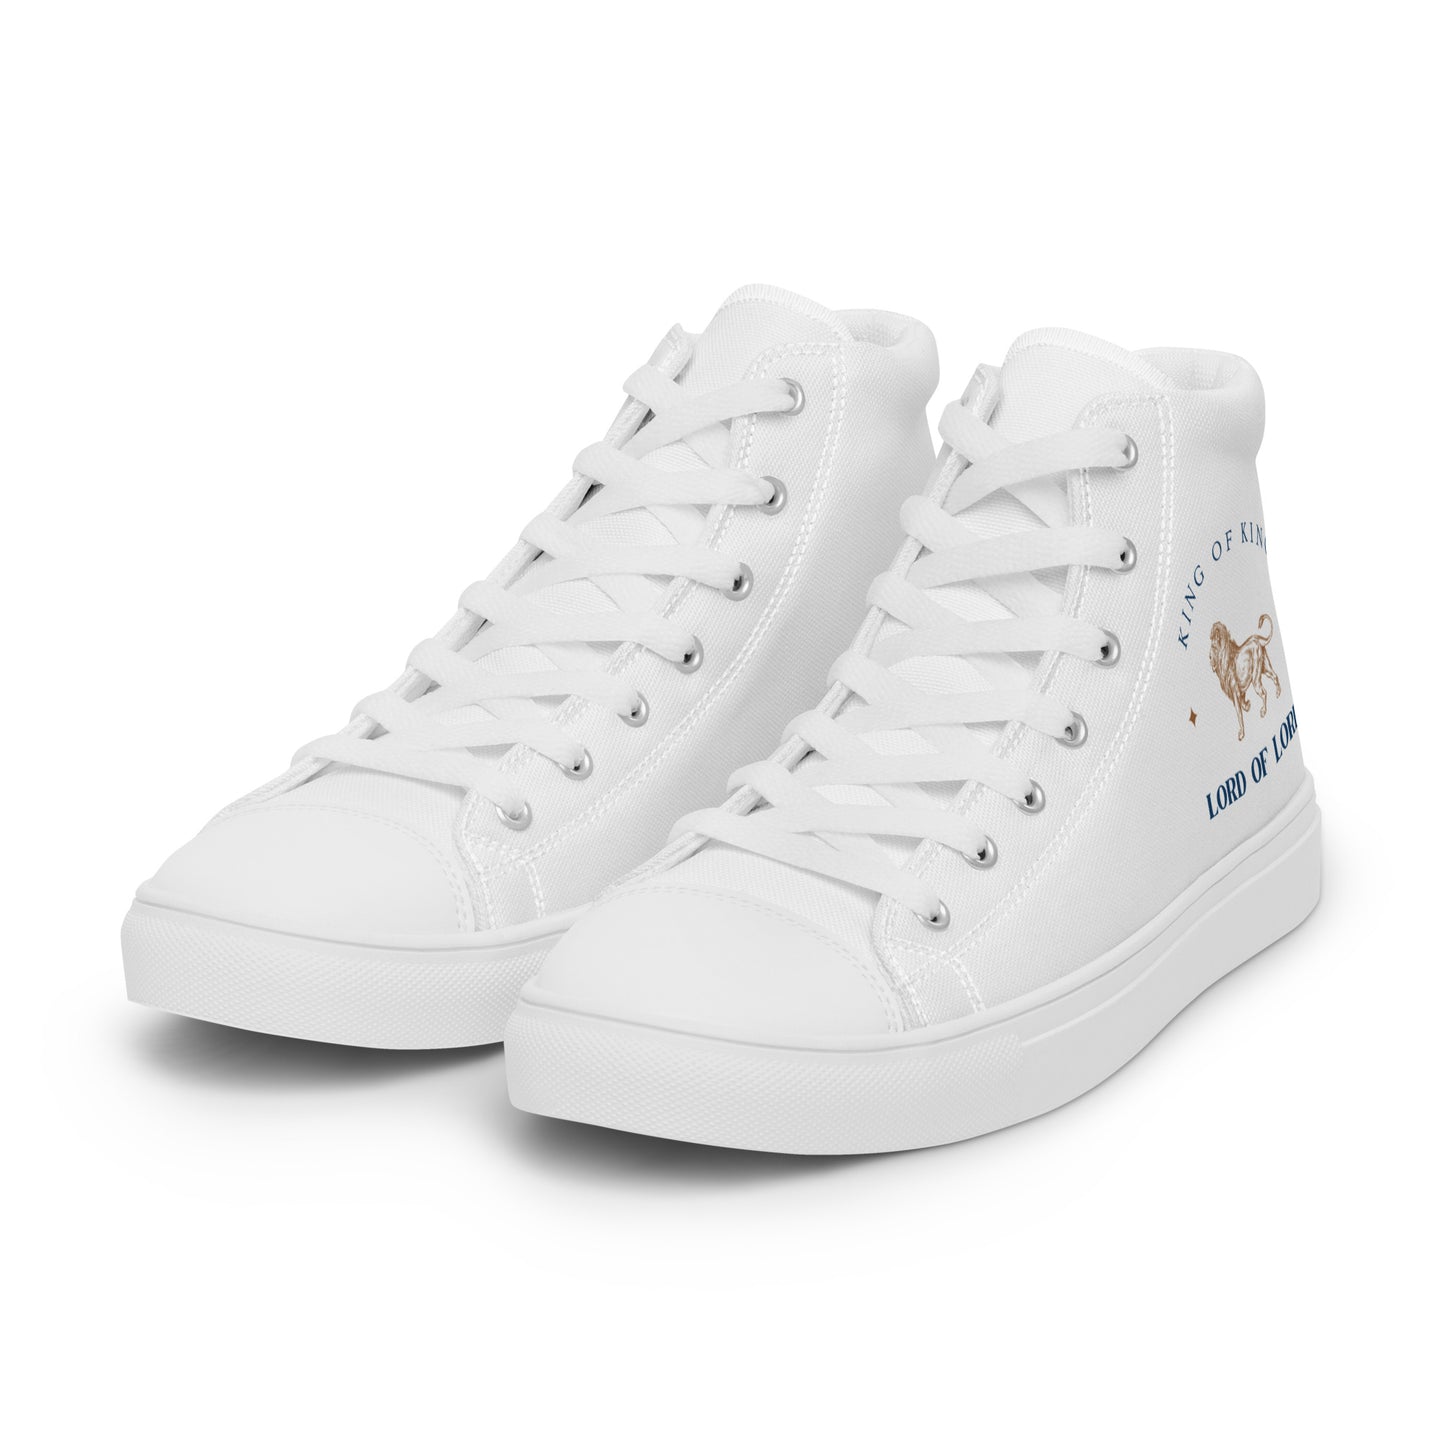 Women’s high top canvas shoes - KING OF KINGS